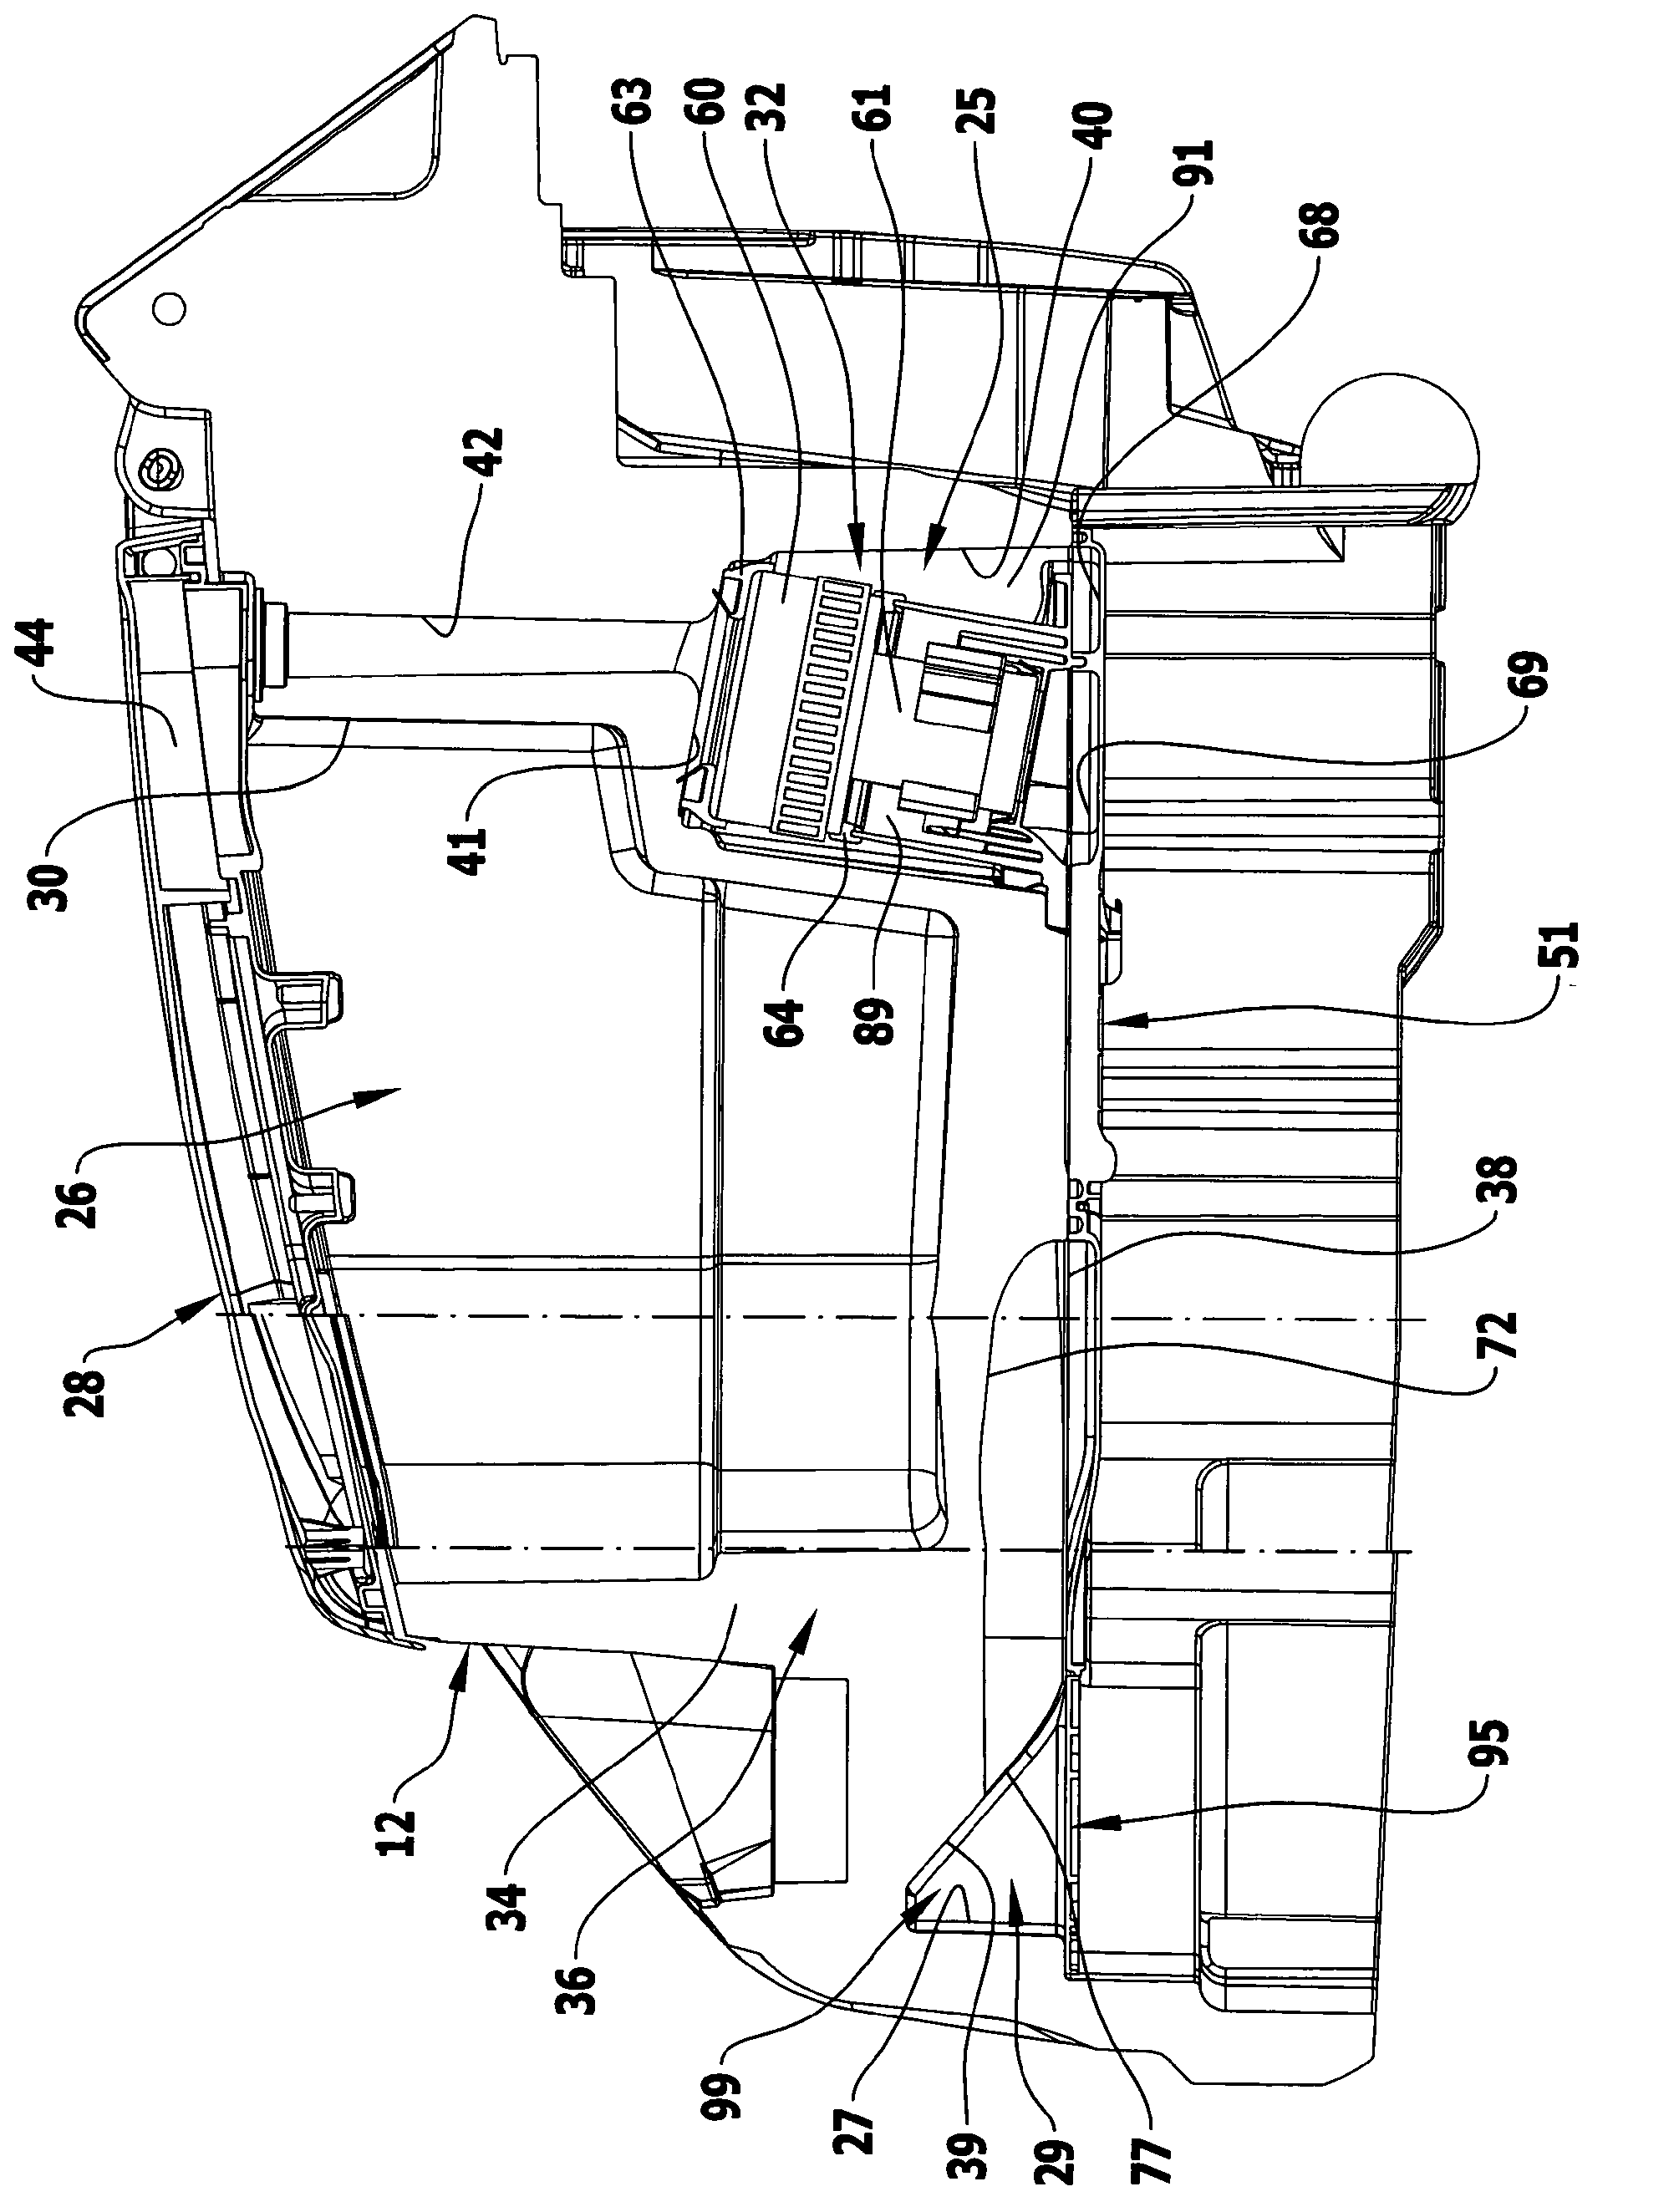 Mobile floor cleaning device having noise insulation